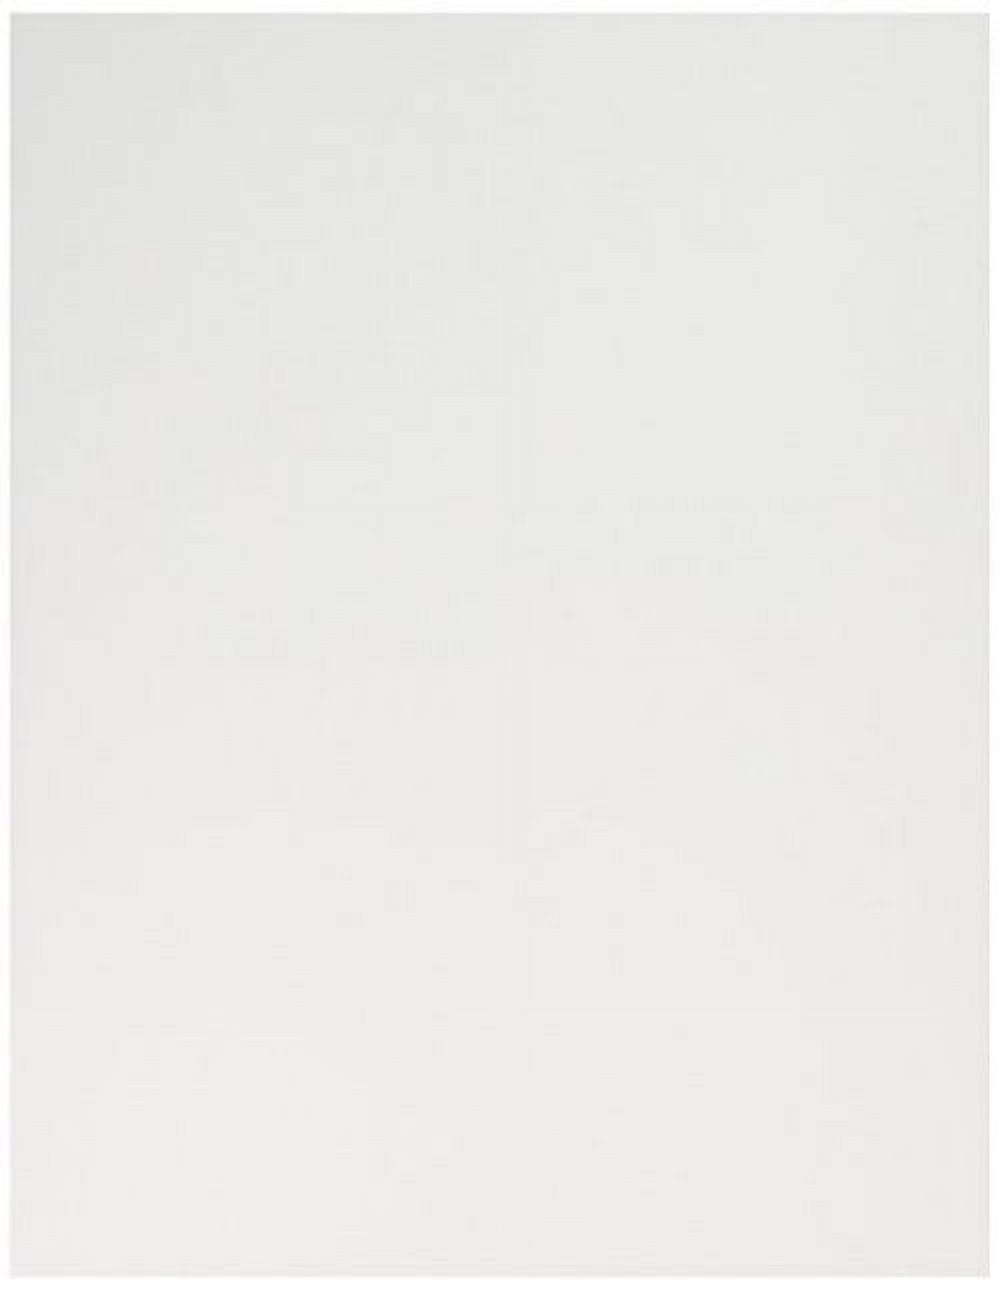  CARDSTOCK & More Premium Super Smooth Blank White Place Cards  3.5x 5 (Flat) 2.5x3.5 (Folded) 80 lb Cover - Best Blank Place Cards-  Bulk 100 Pack : Office Products